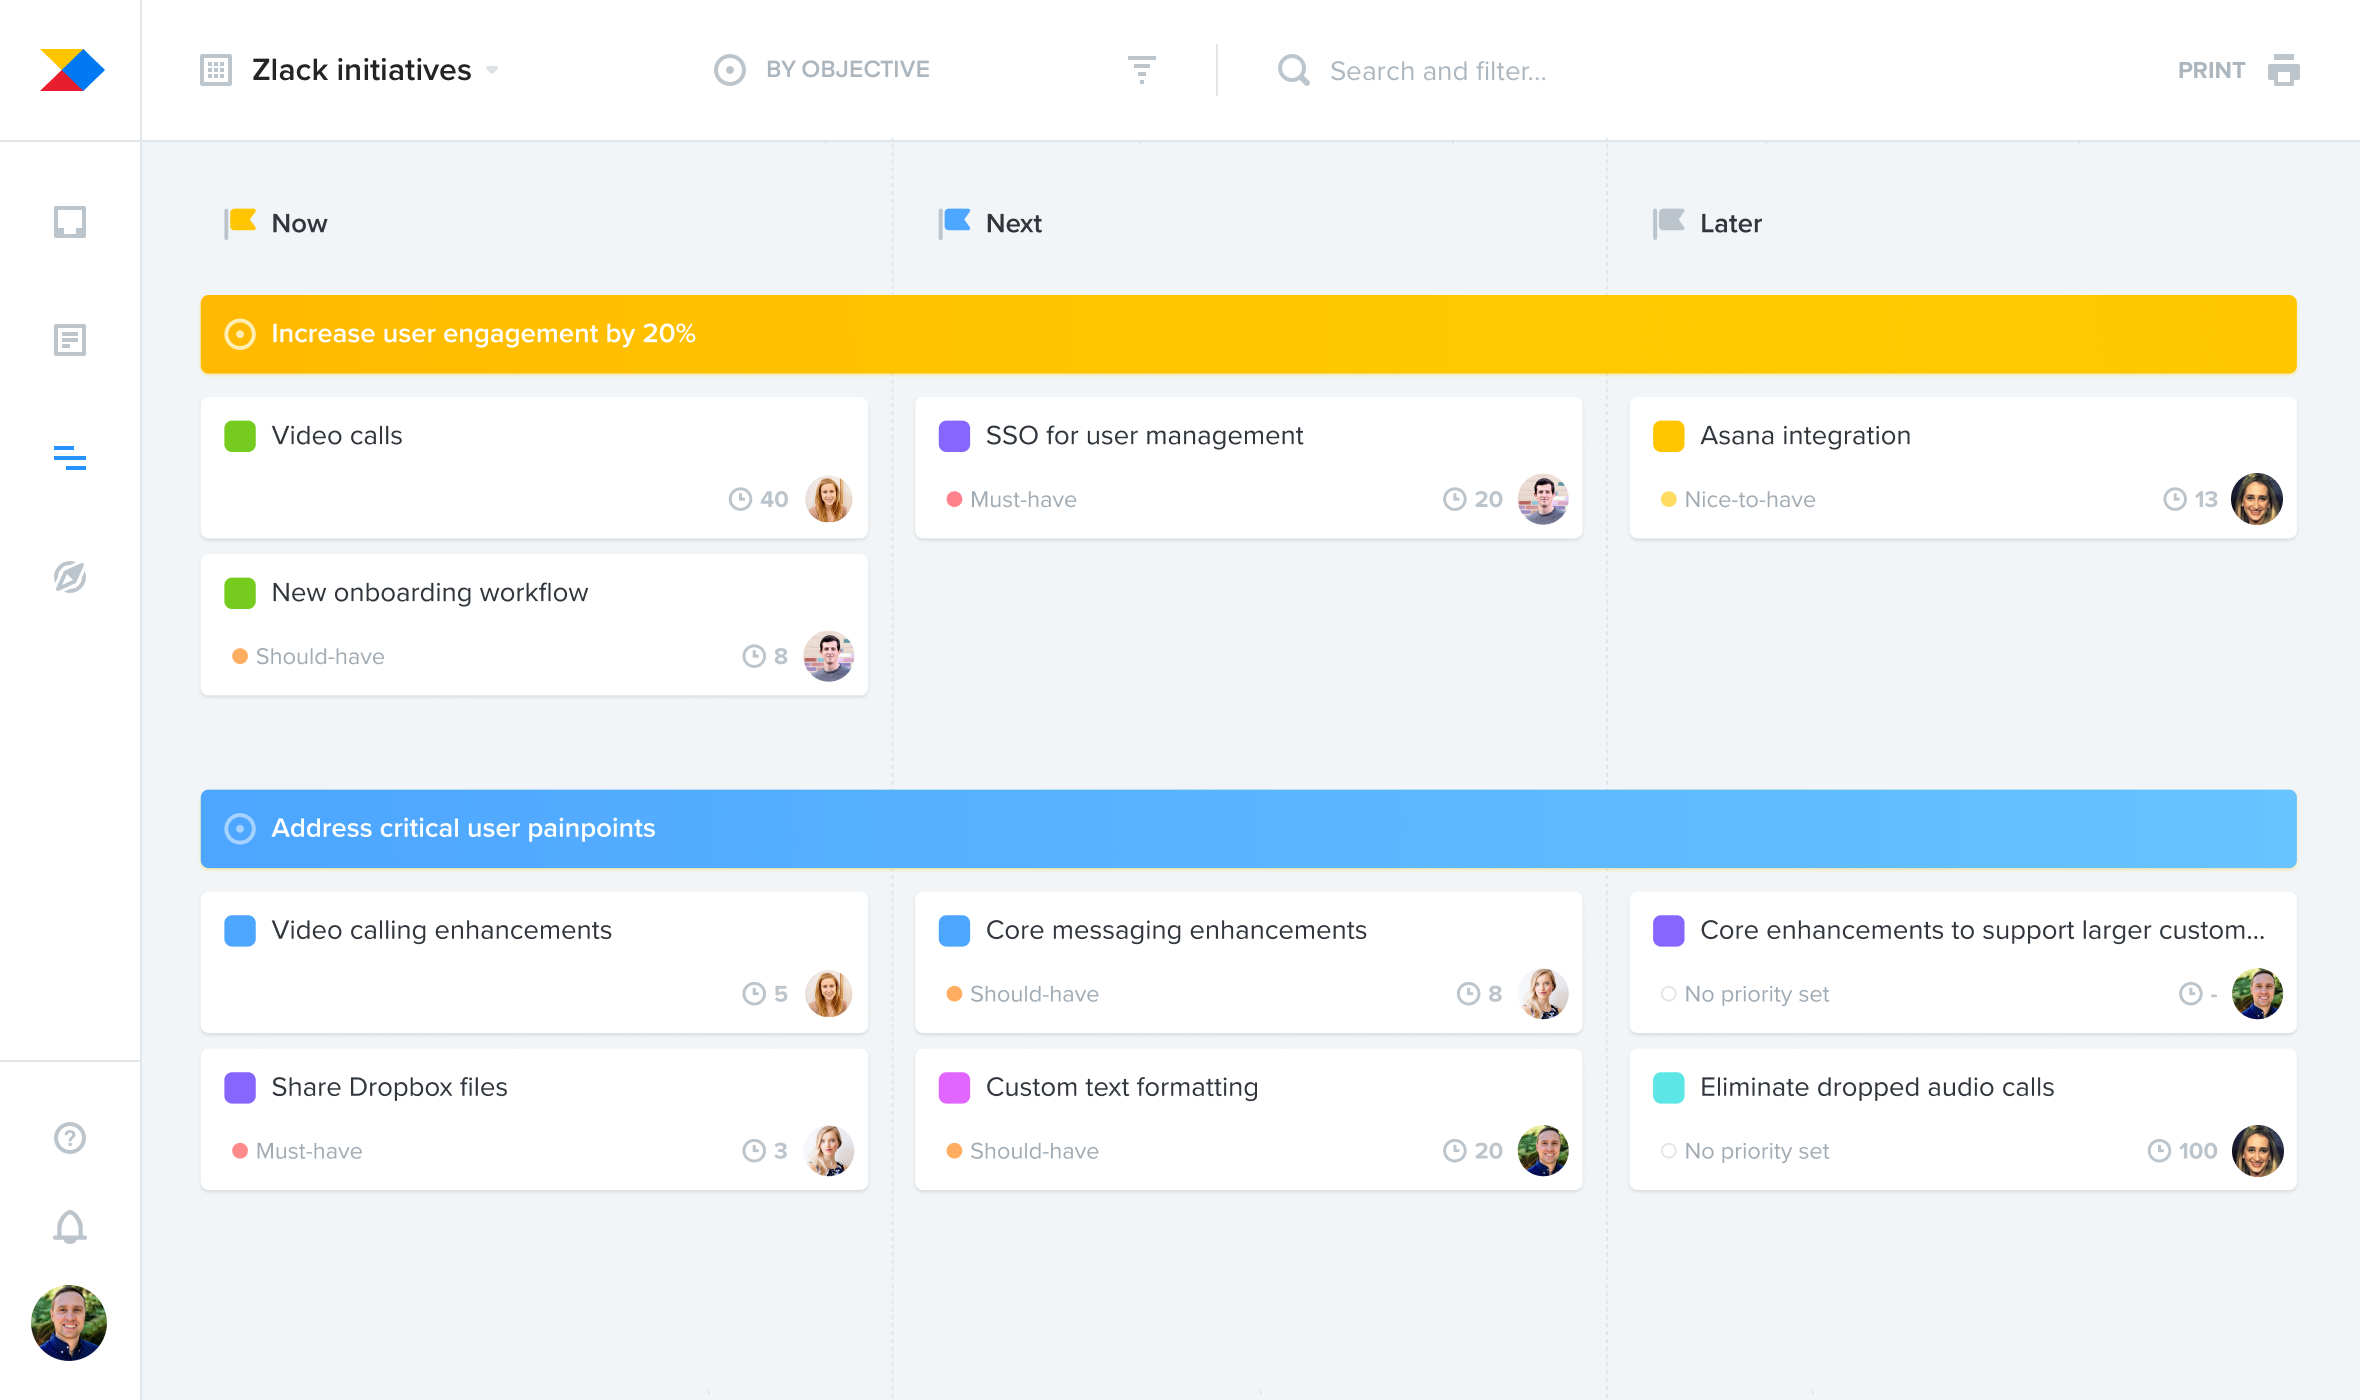 Productboard Software - Create high-level Agile or kanban style roadmaps that group features into Now/Next/Later time horizons (or other categories of your choice) or by each feature's current status (New idea, Discovery, Backlog, Delivery, Launched)